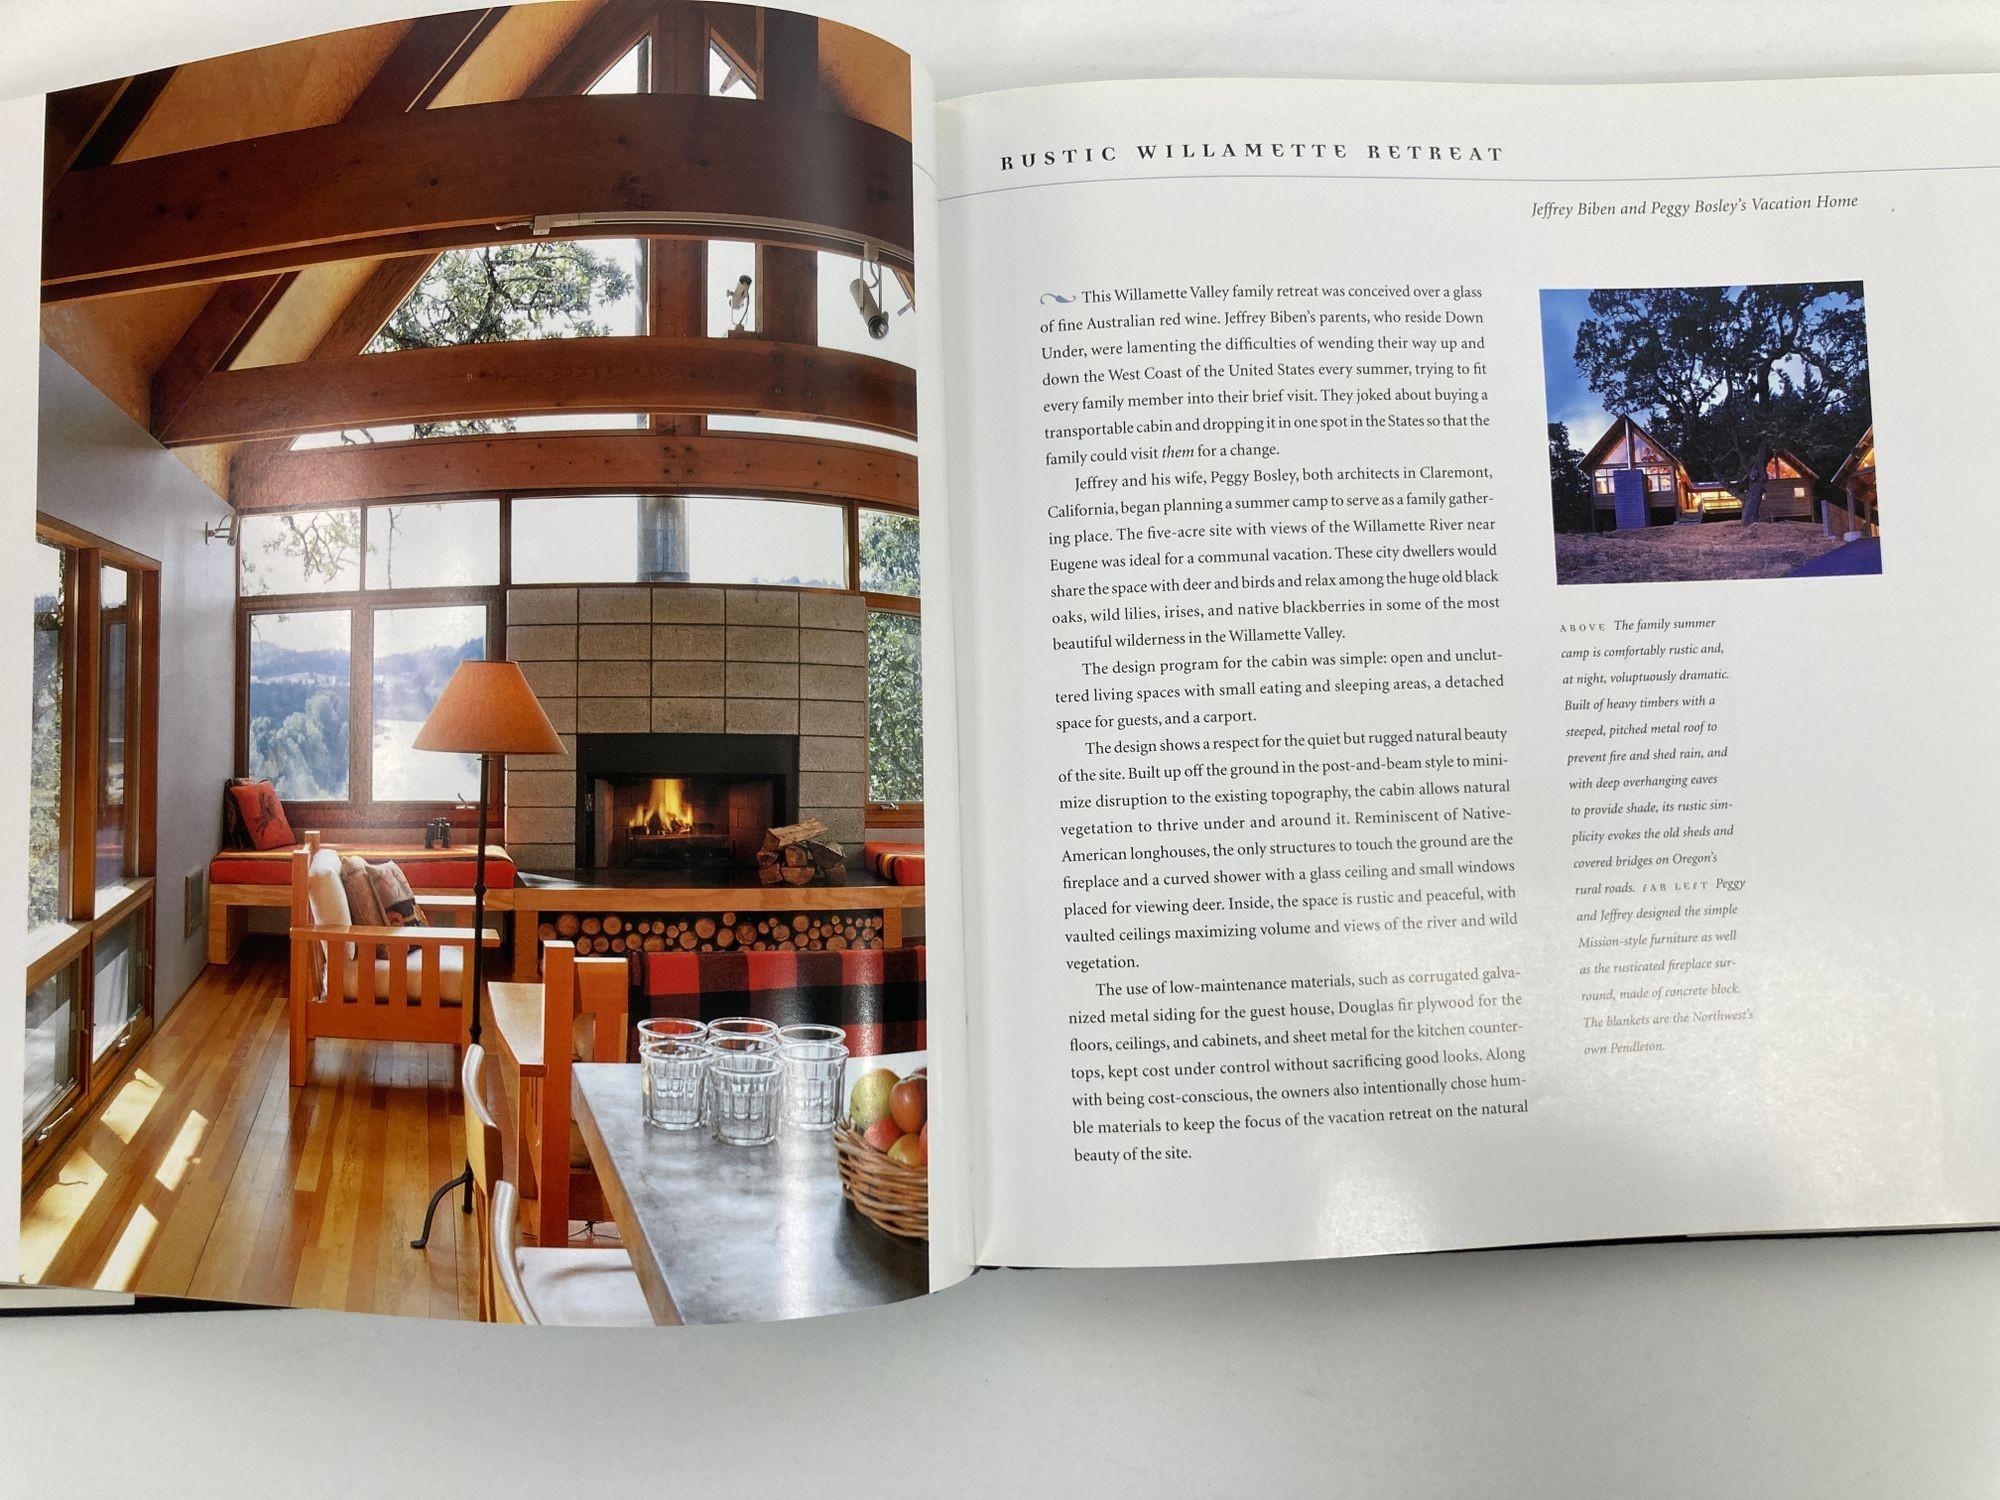 20th Century Northwest Style: Interior Design and Architecture in the Pacific Northwest Hardc For Sale